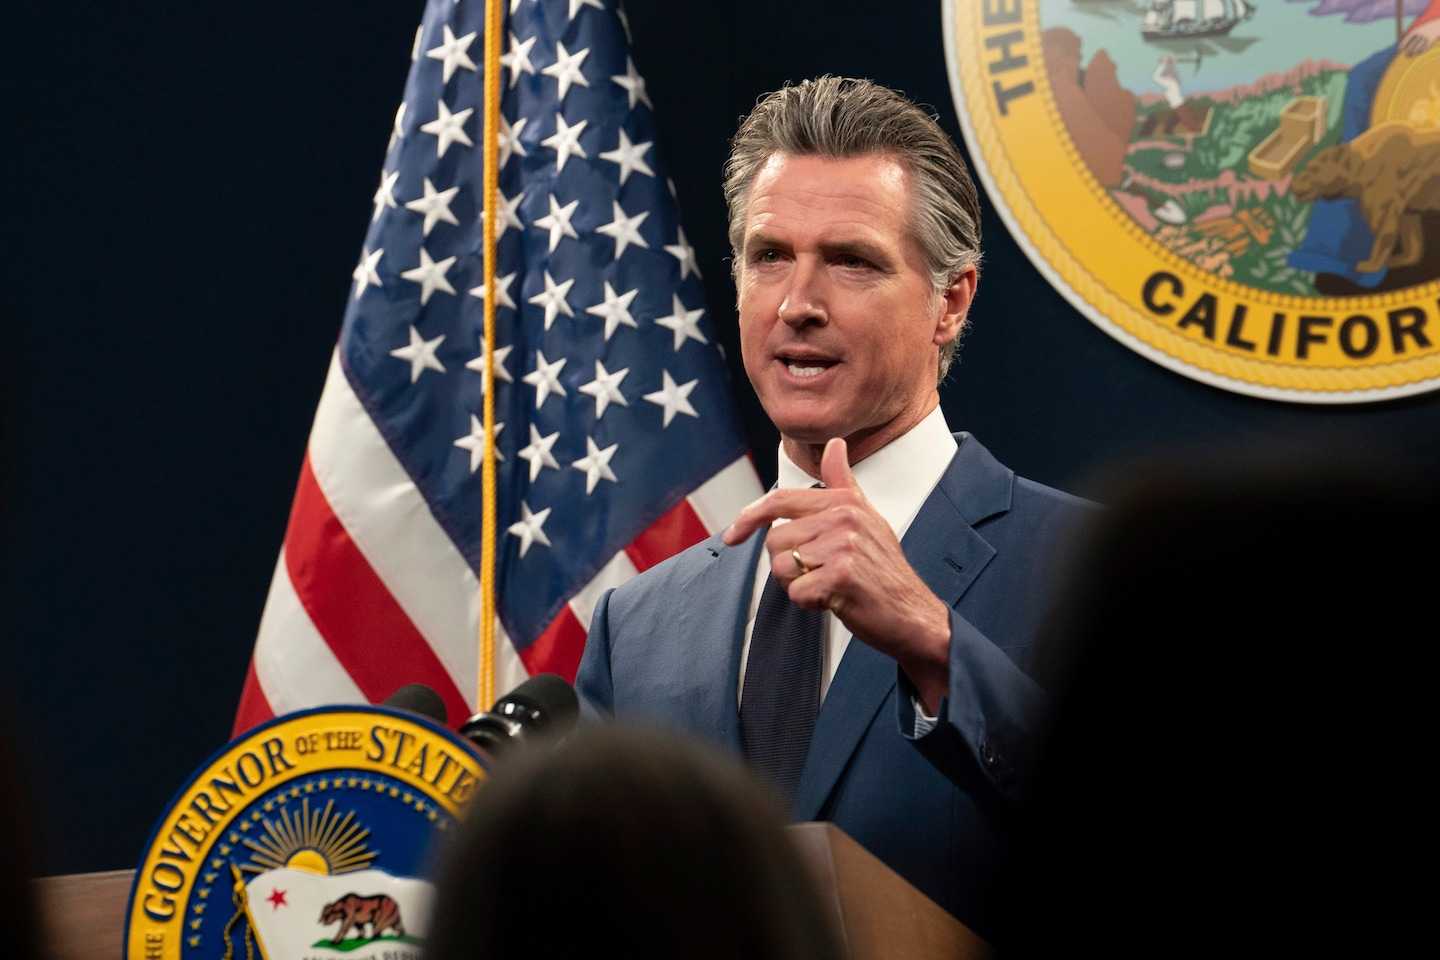 California's budget emergency has Governor Gavin Newsom at odds with his allies